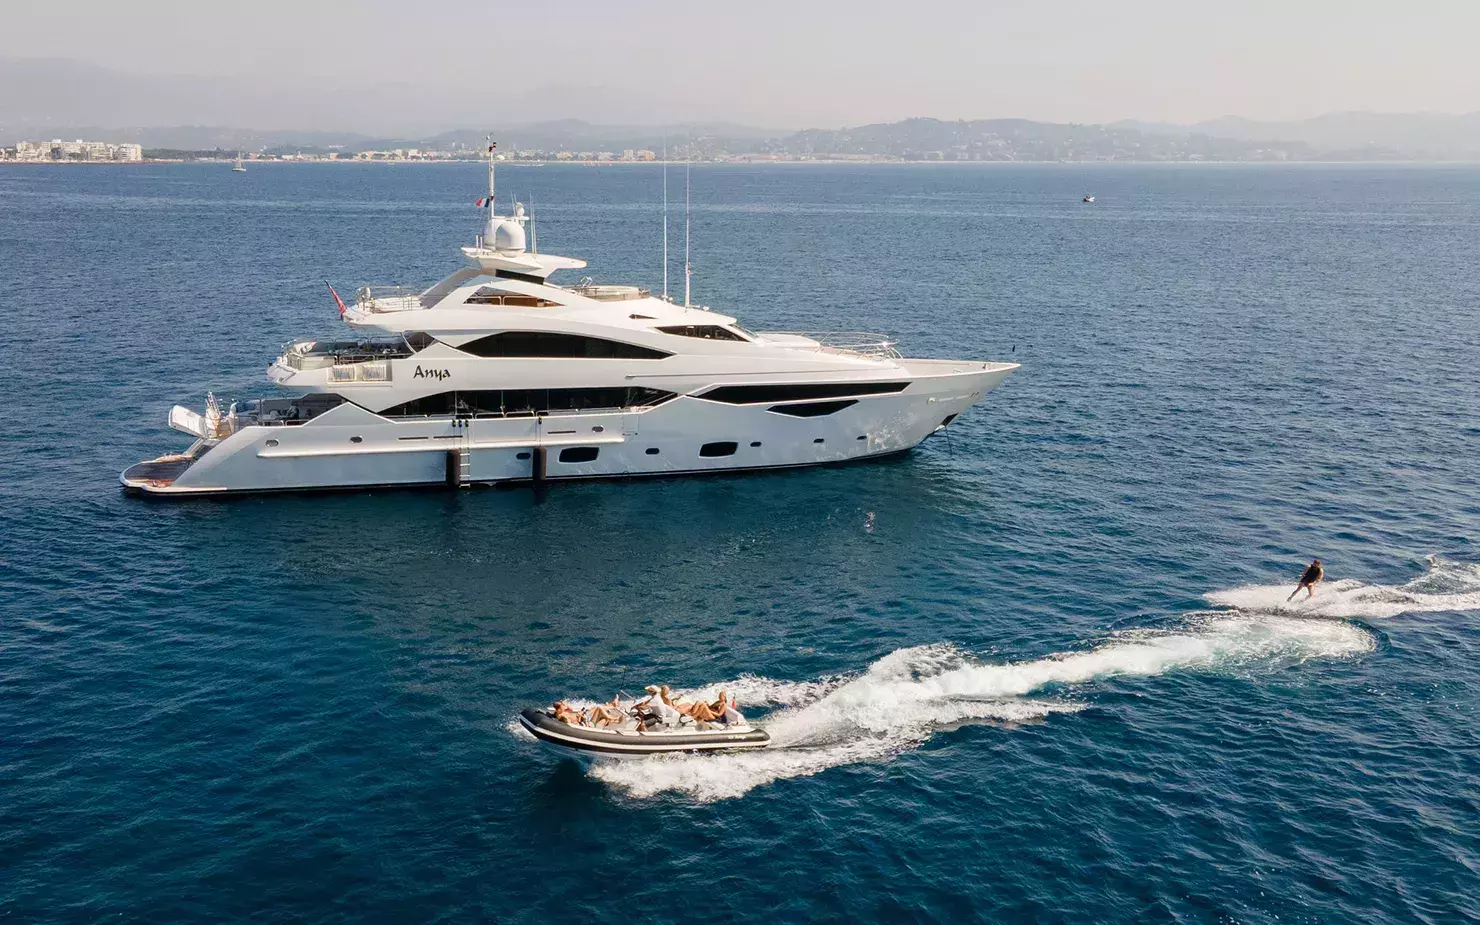 Anya by Sunseeker - Top rates for a Charter of a private Superyacht in Italy